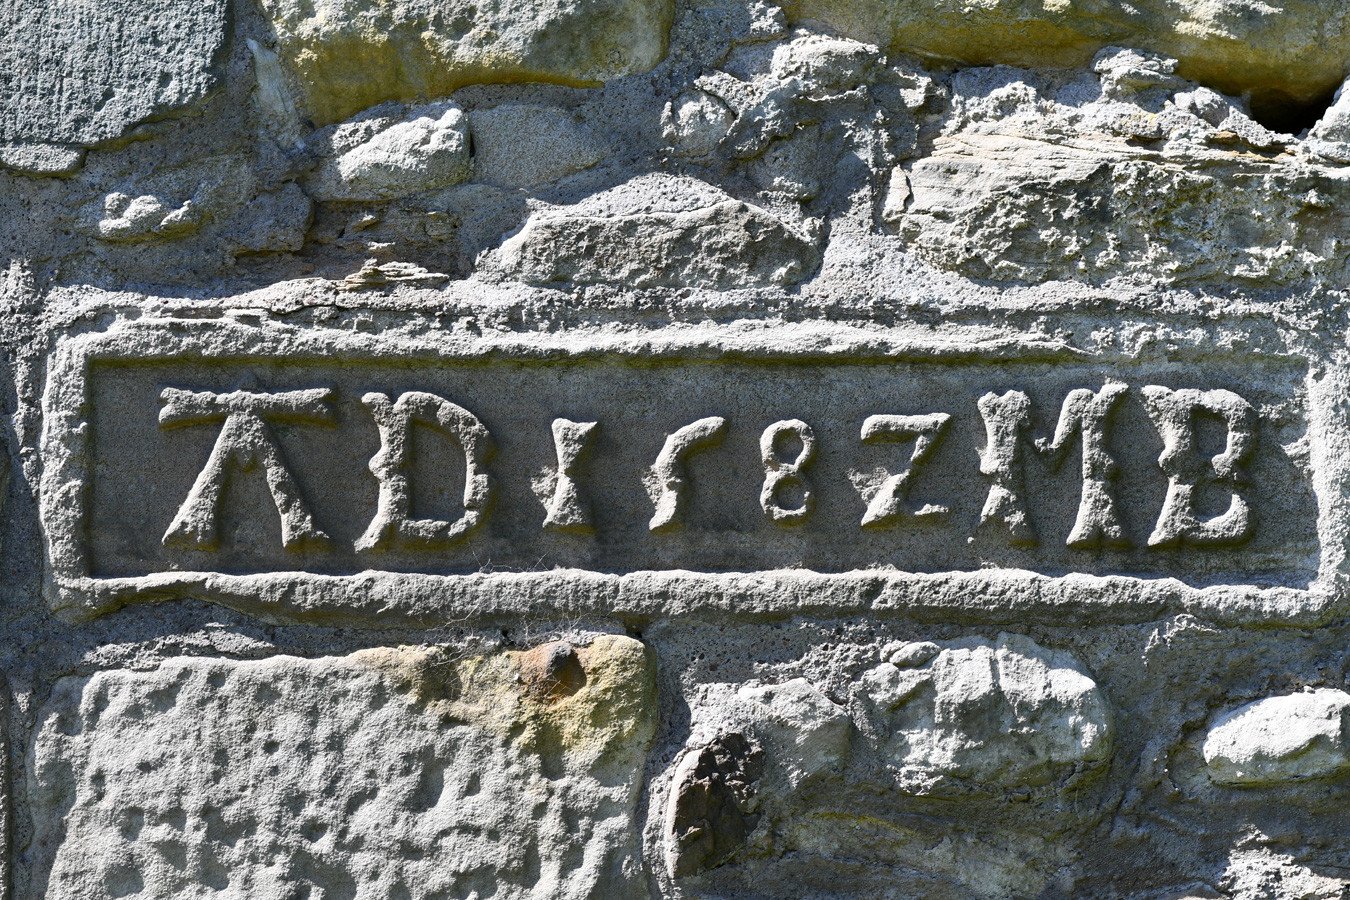 stone carving at Midhope Castle - an Outlander filming location in Scotland